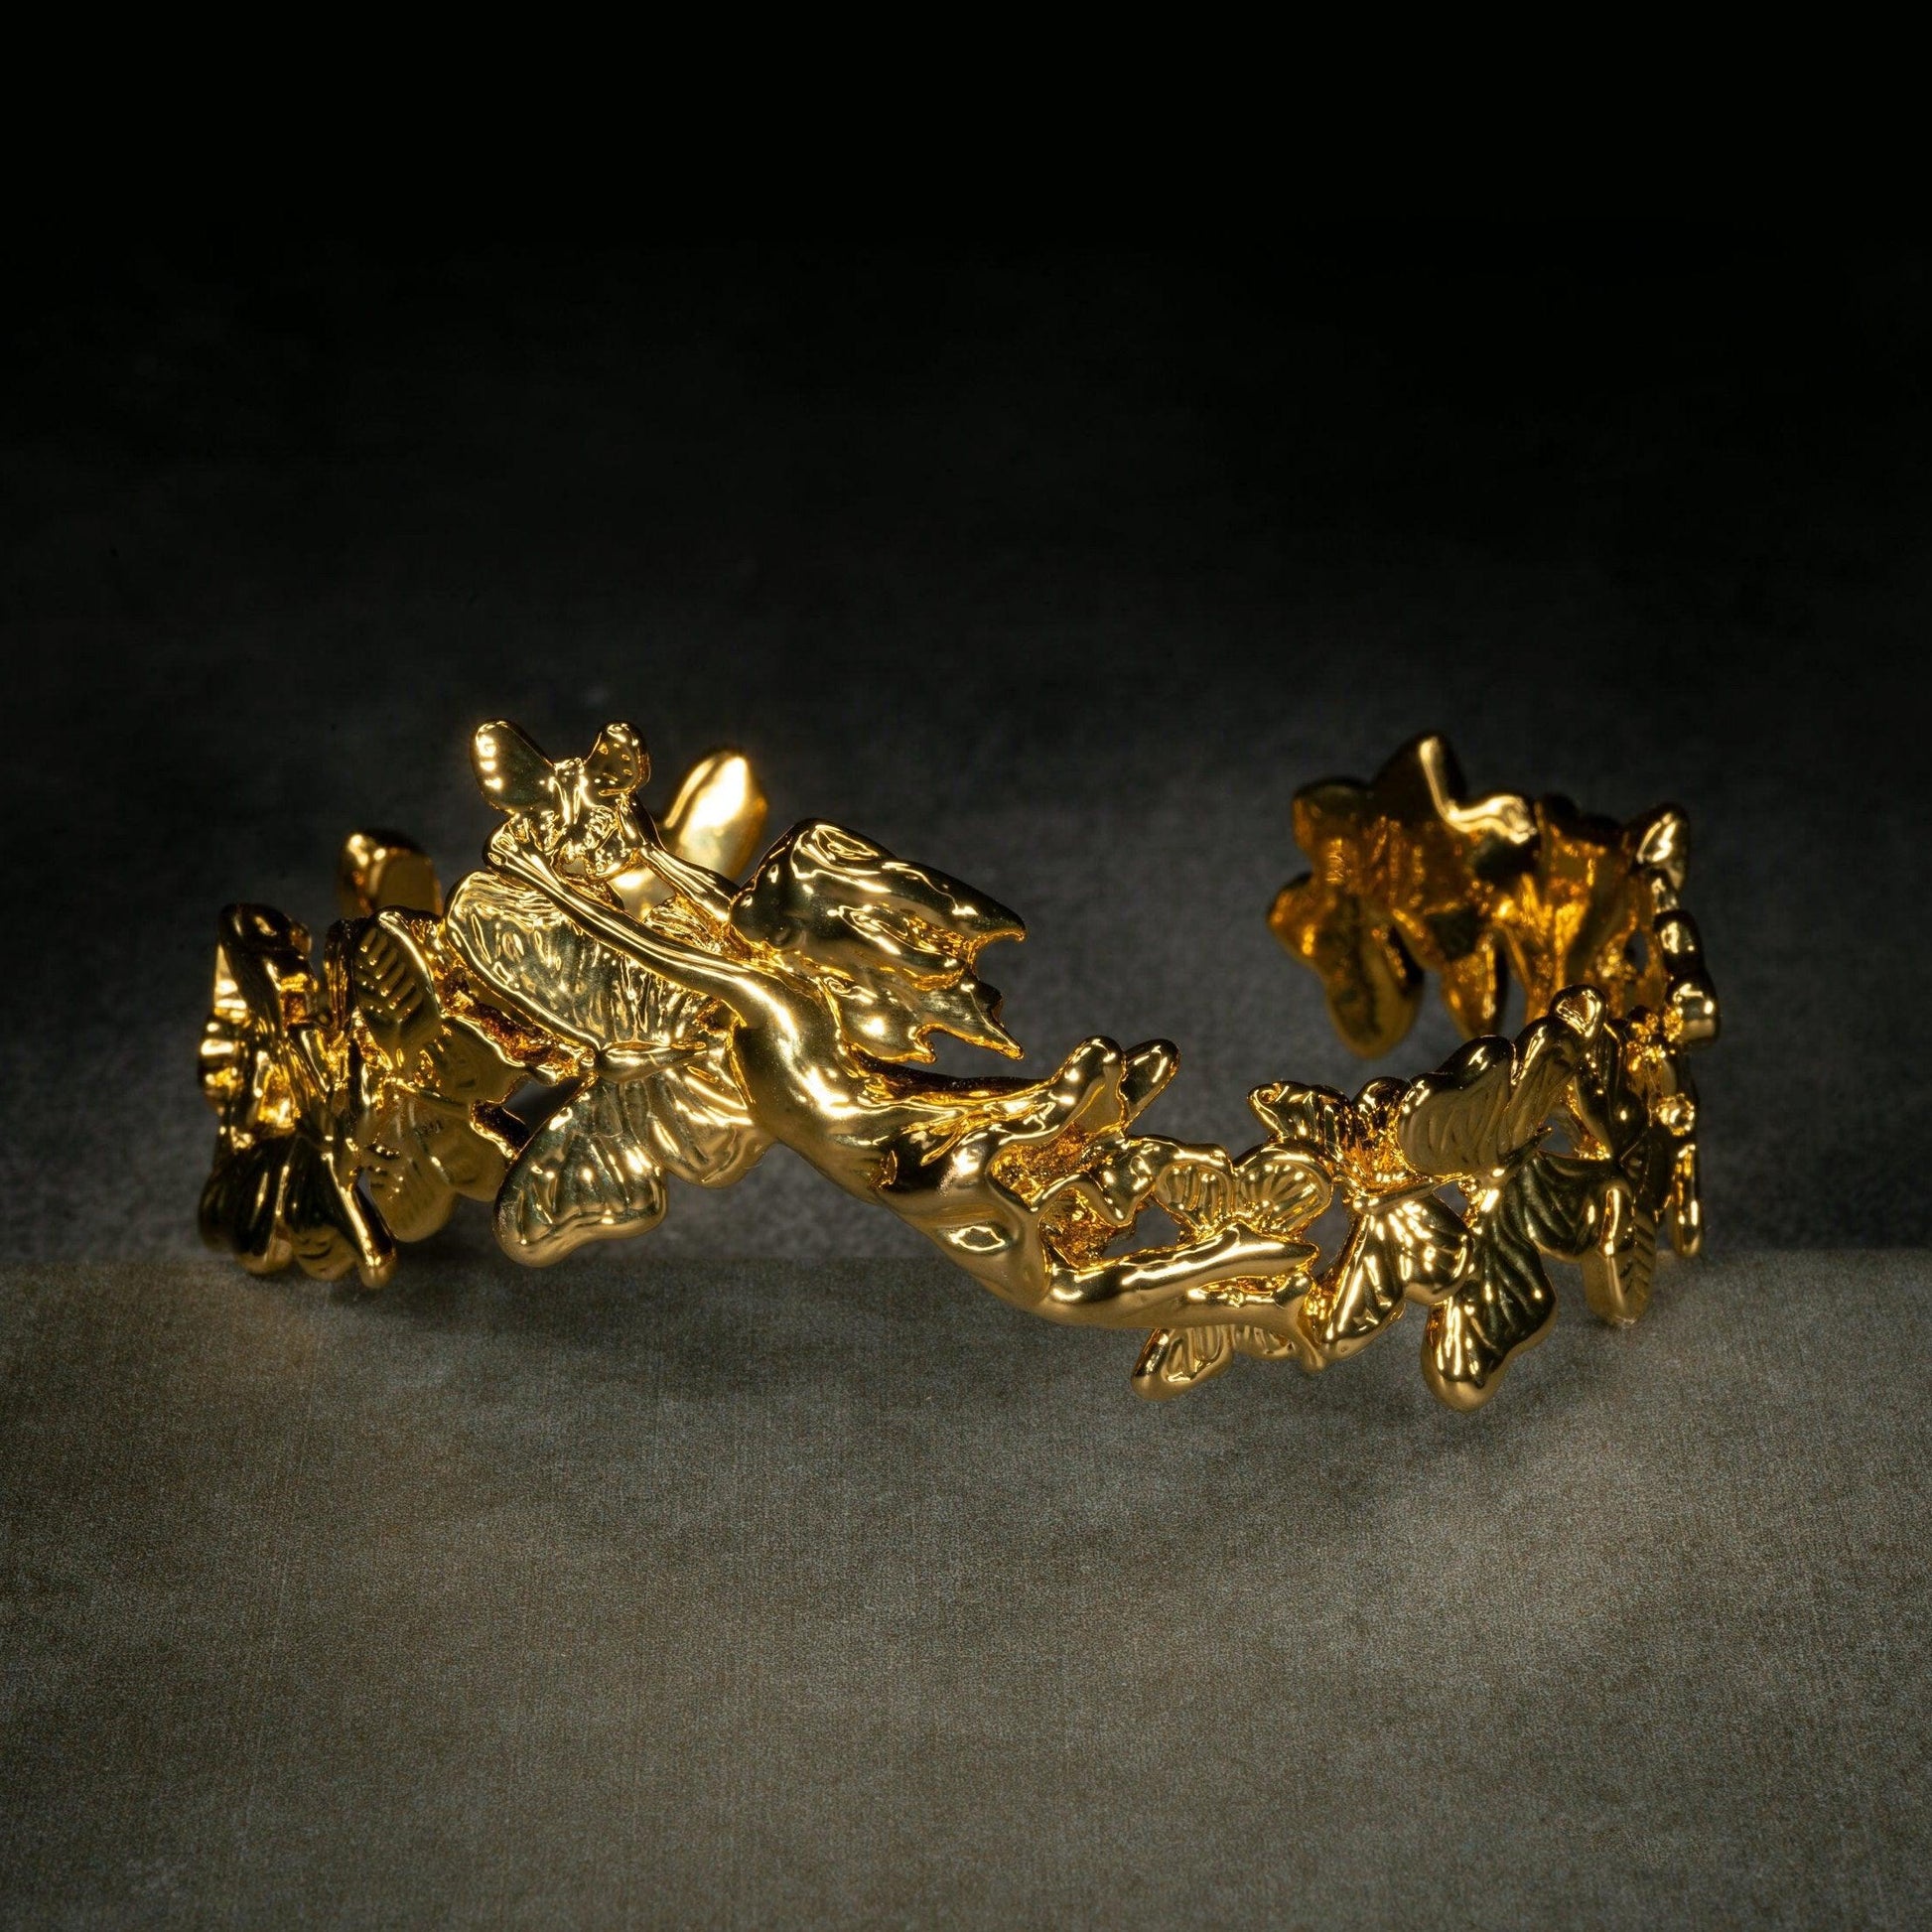 Unique Bracelet "Lift Her with Butterflies" - Gold Gift, Gift For Mom, Artistic, Jewelry Cuff, Bracelet, Gold, Silver, Brass